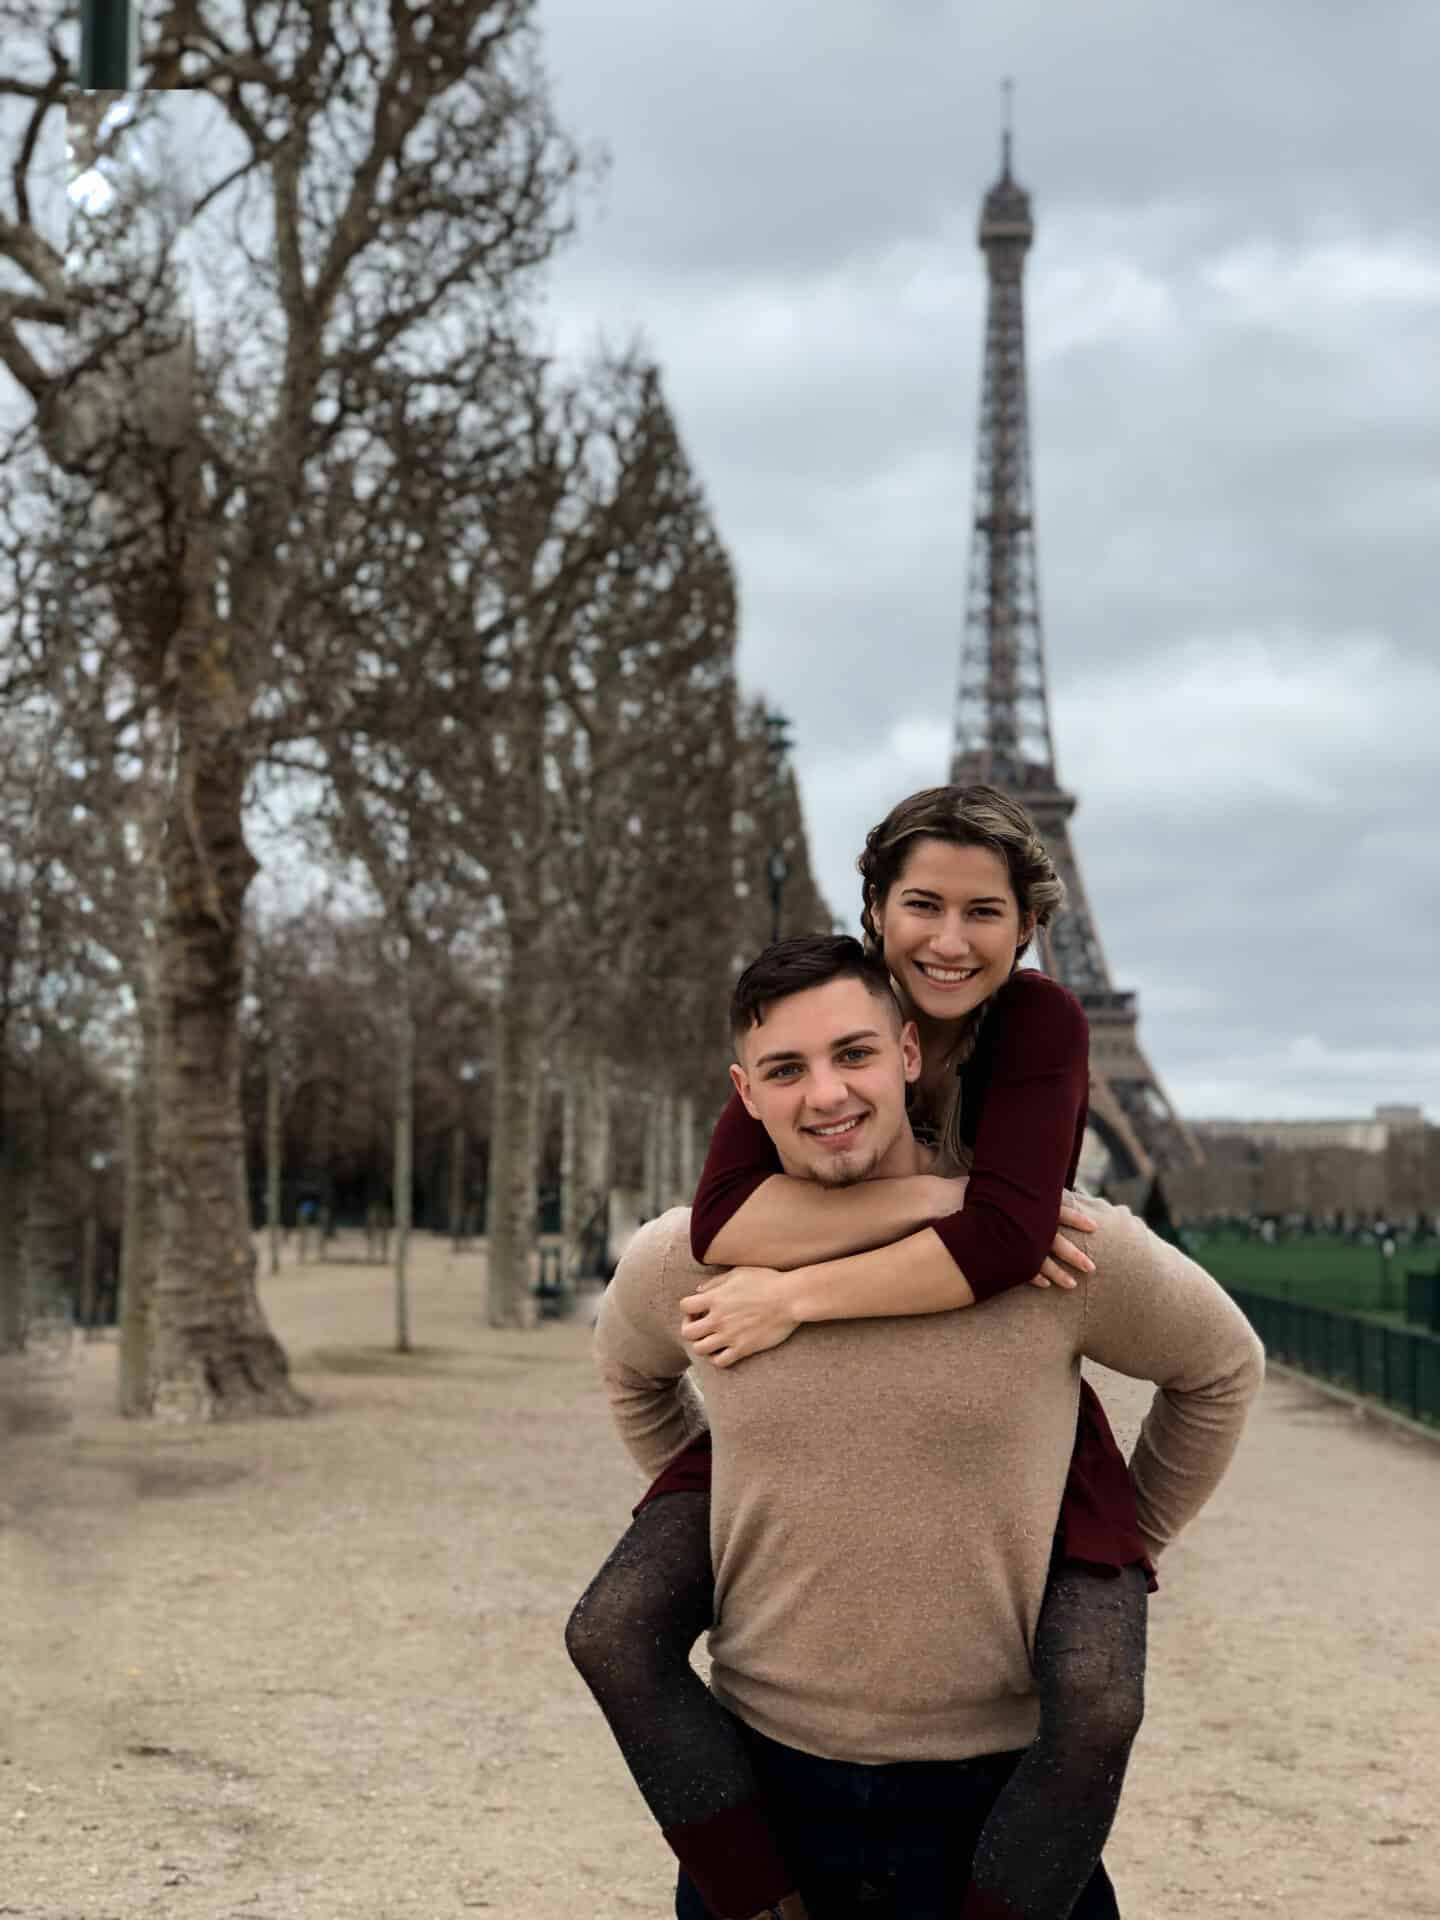 Man Carrying woman at the eiffel tower